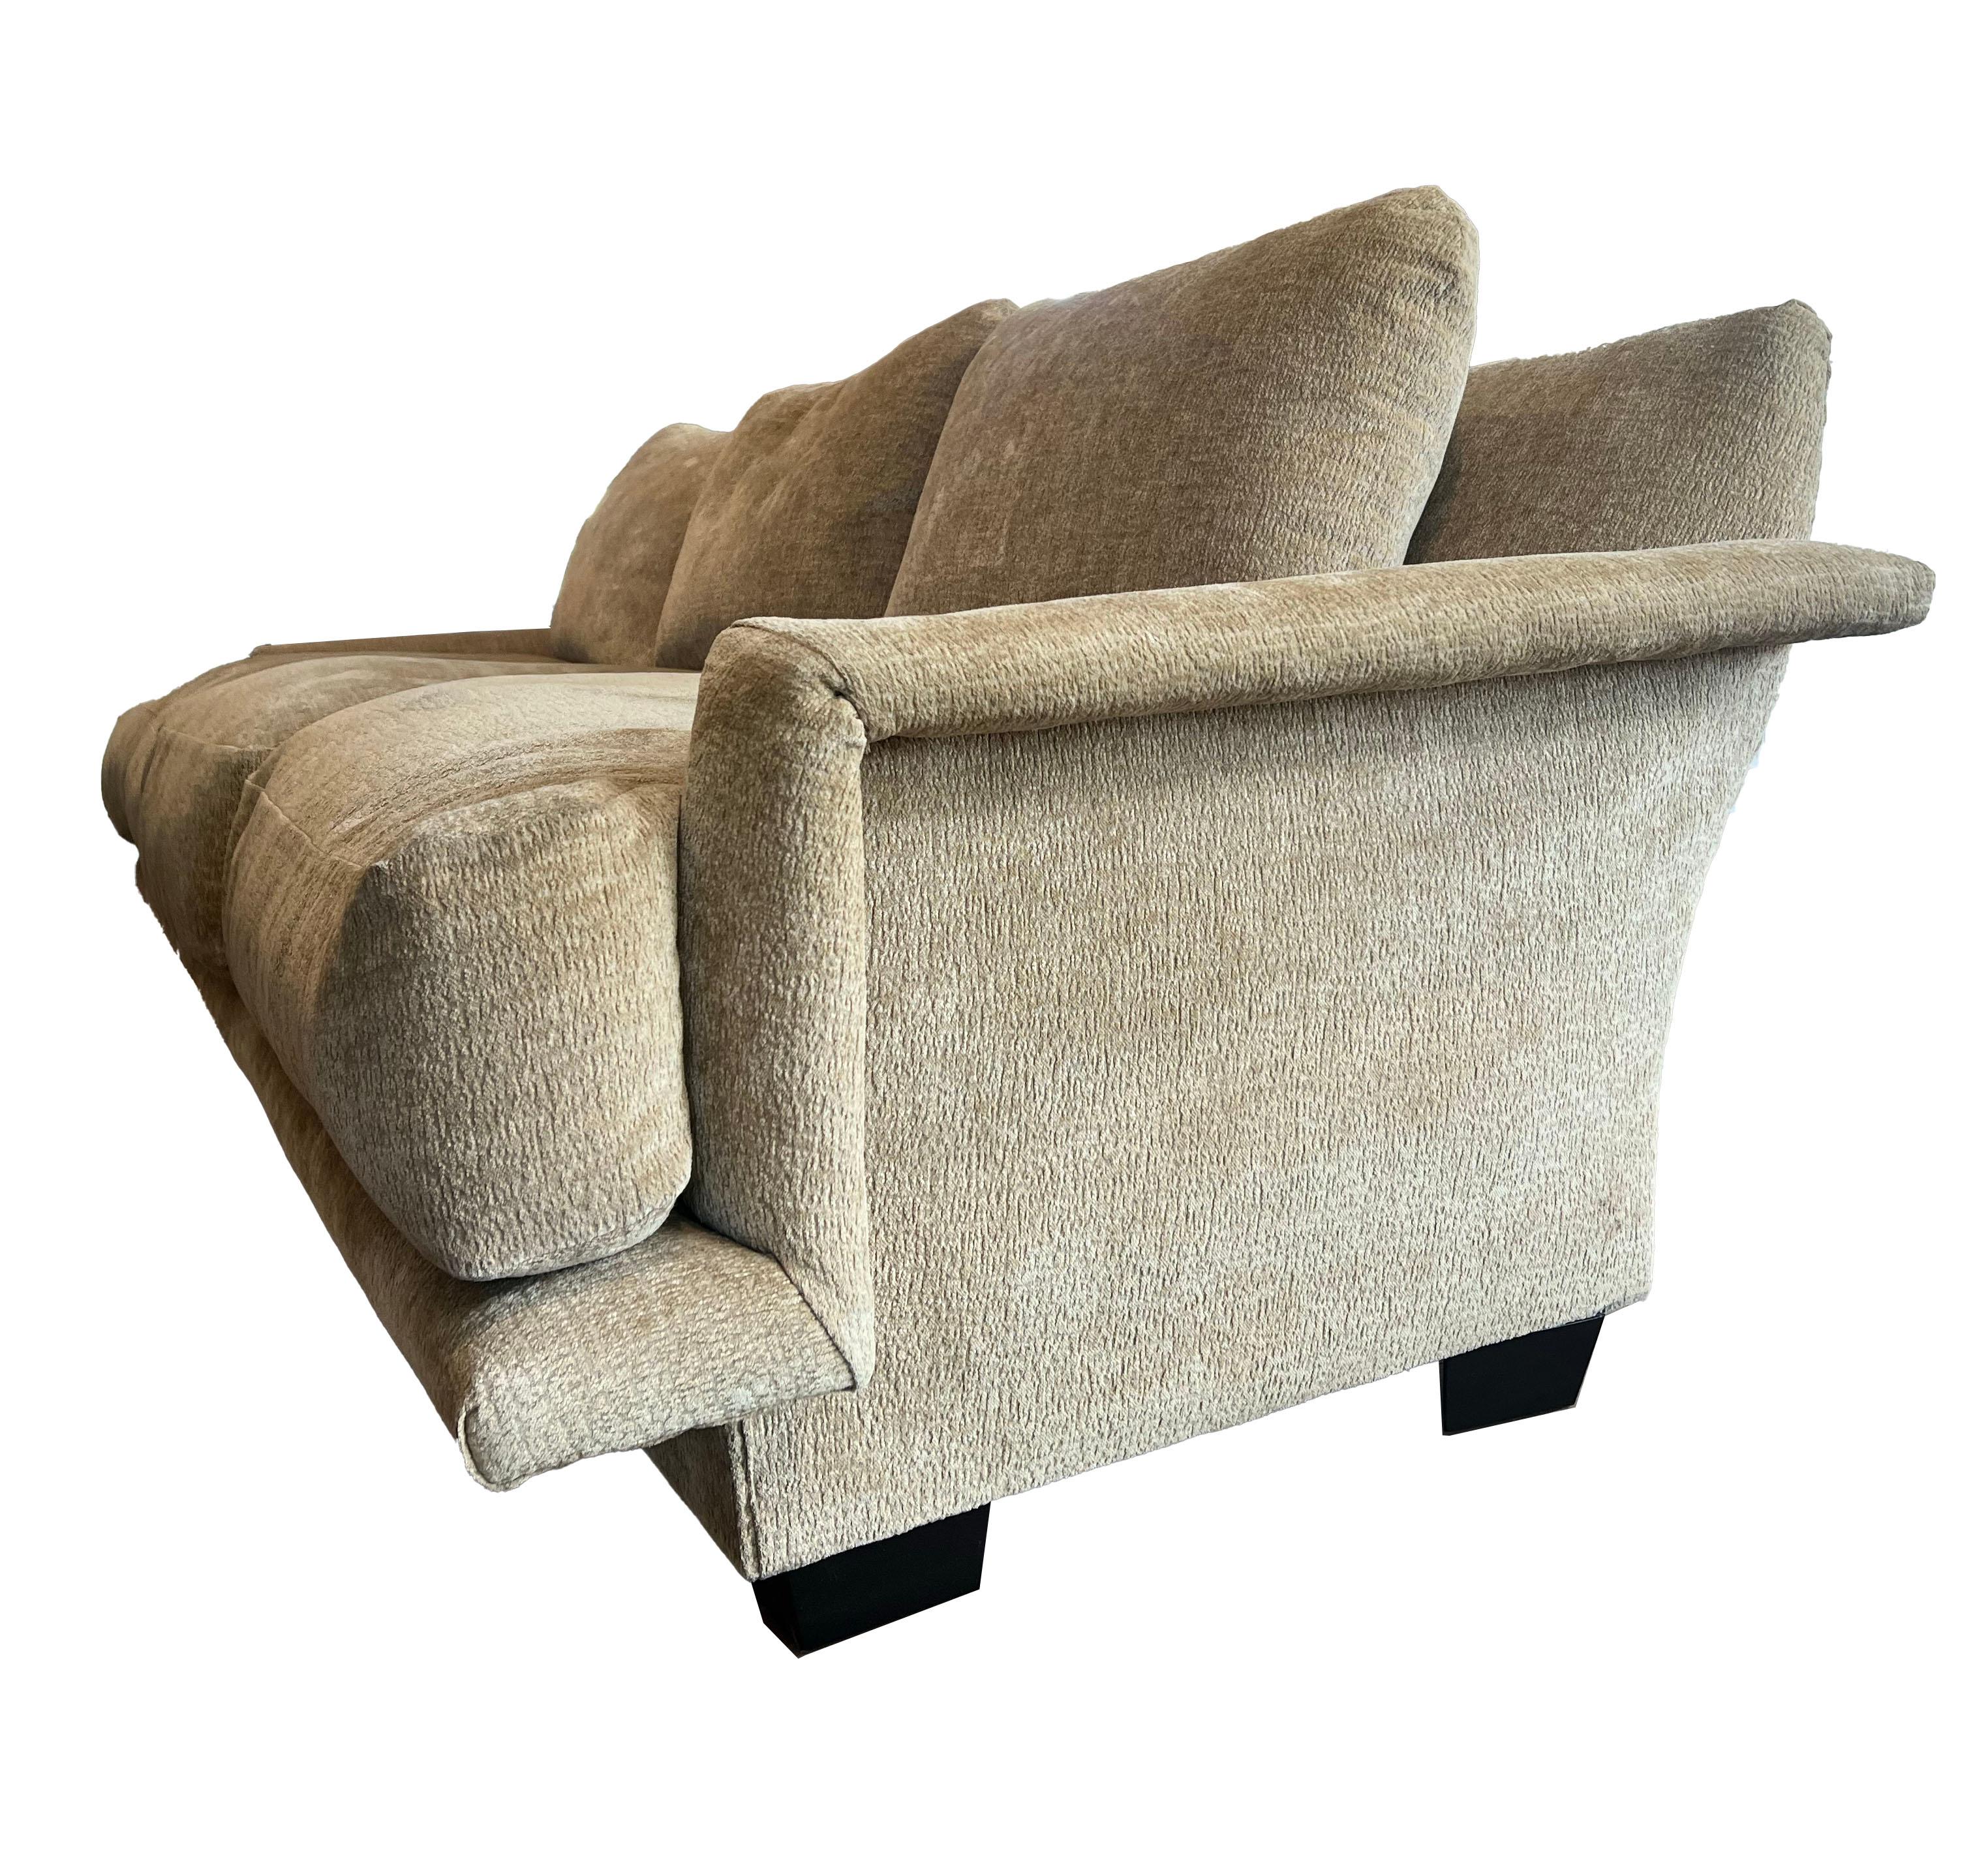 Introducing the epitome of sophistication – our Beige Textured Velvet Upholstered 3-Seat Sofa, a fusion of comfort and contemporary design. Sink into luxury with the plush back cushions that provide an indulgent seating experience. The square